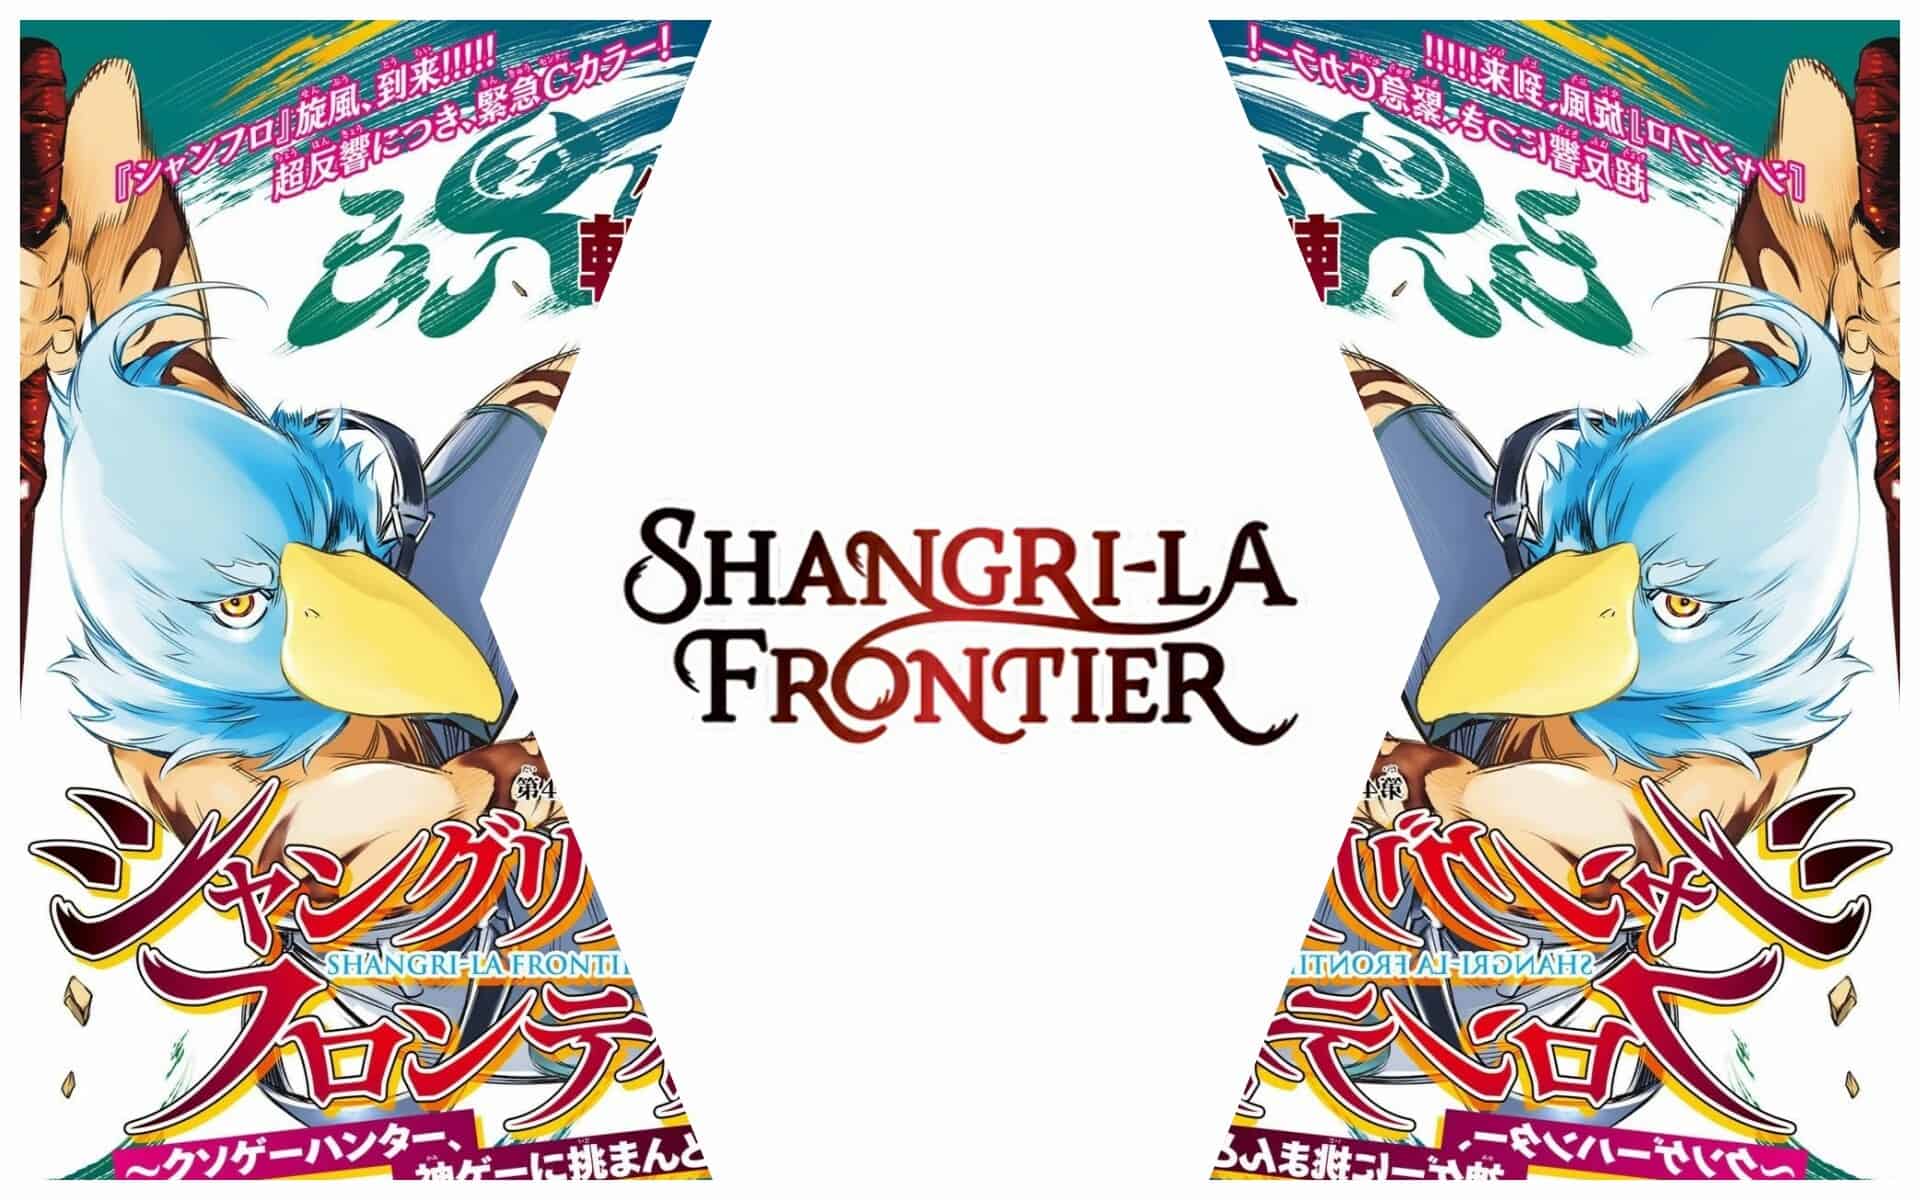 Shangri-La Frontier Chapter 125 Release Date, Spoilers & Where To Read